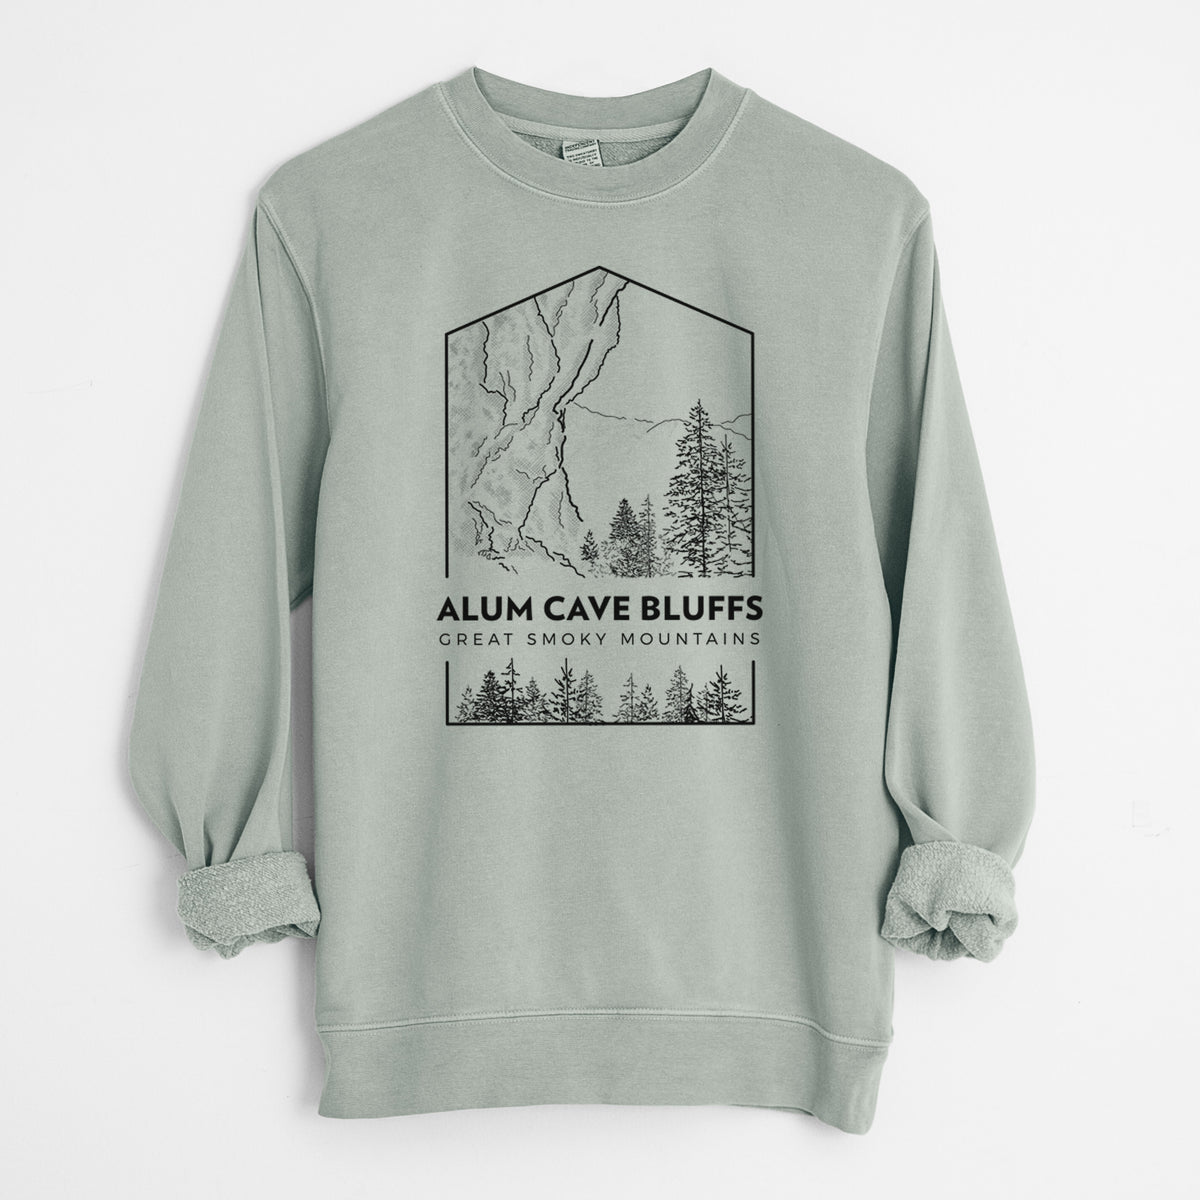 Alum Cave Bluffs - Great Smoky Mountains National Park - Unisex Pigment Dyed Crew Sweatshirt